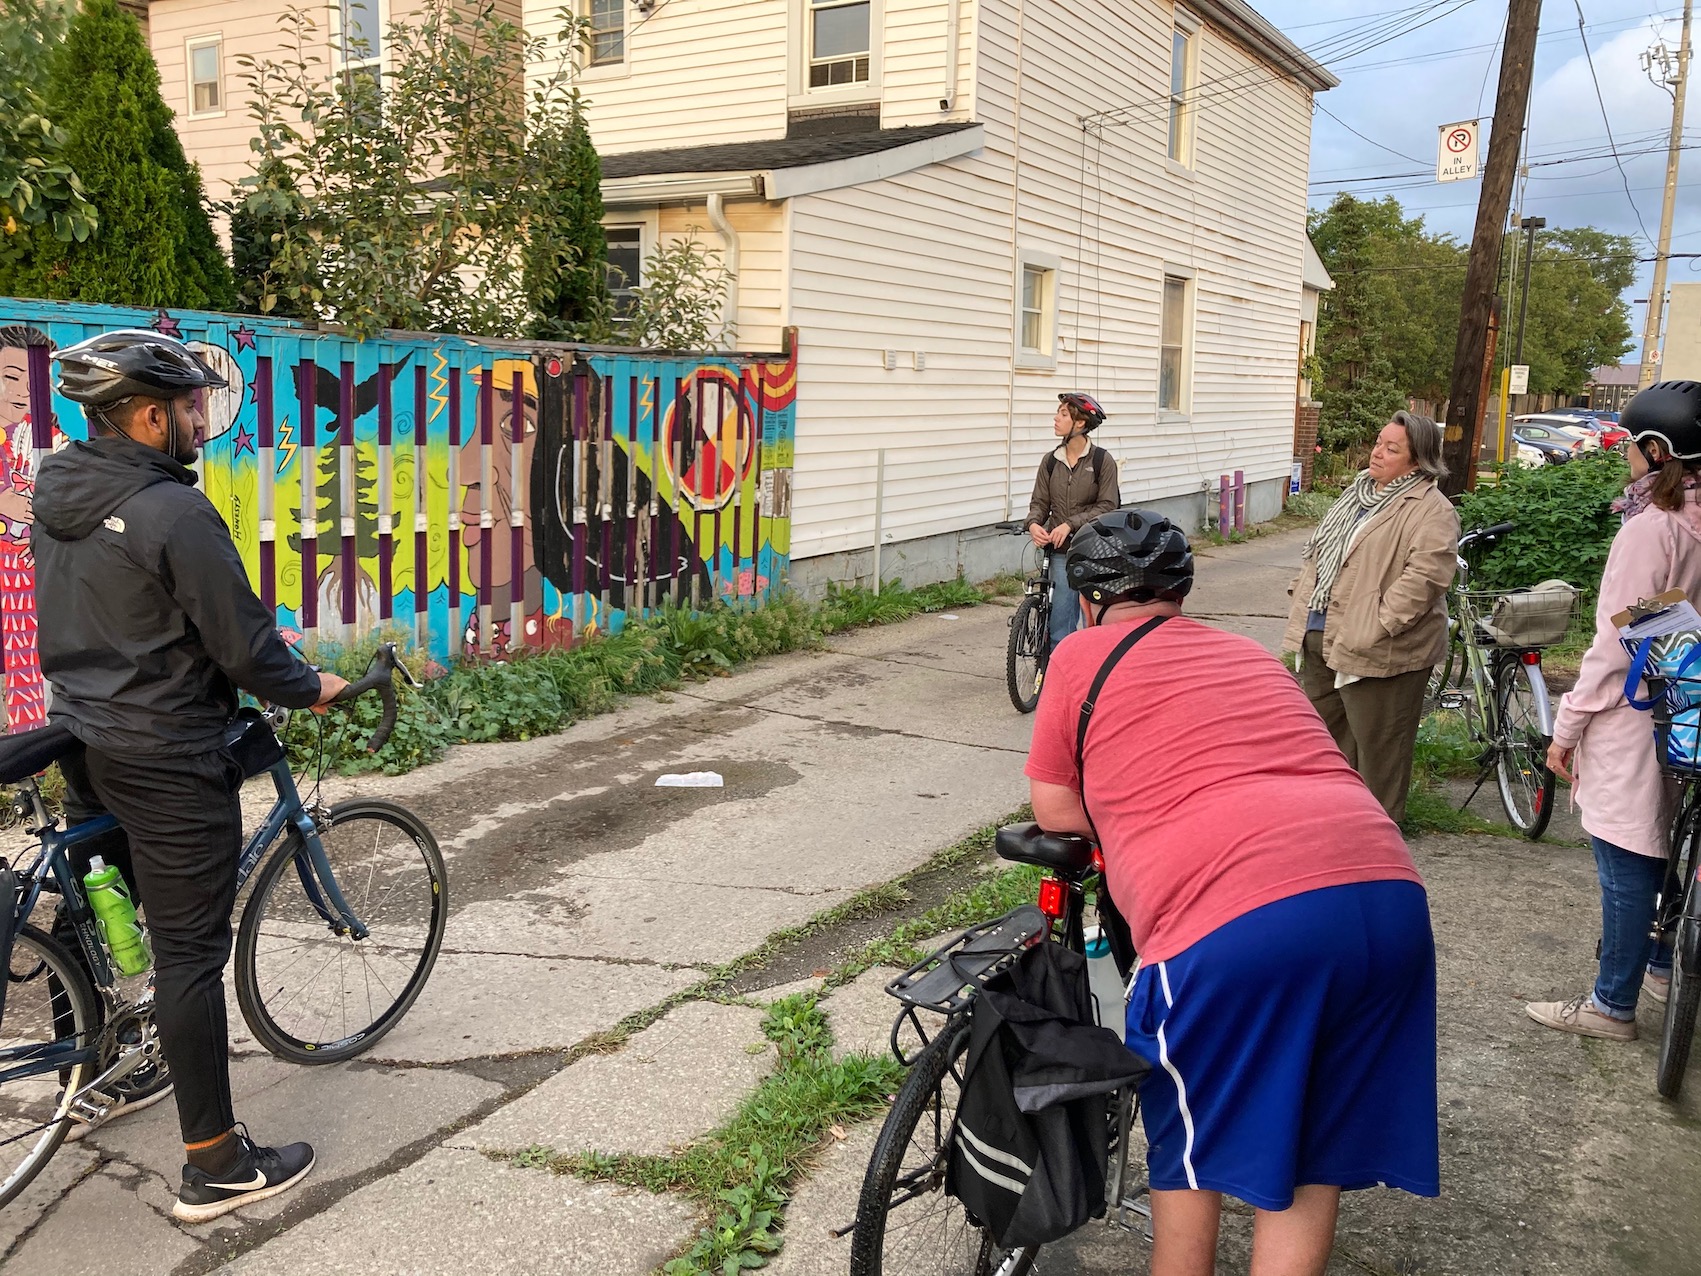 A group of 5 people with bikes listening to someone speak about a colourful mural painted on the background fence